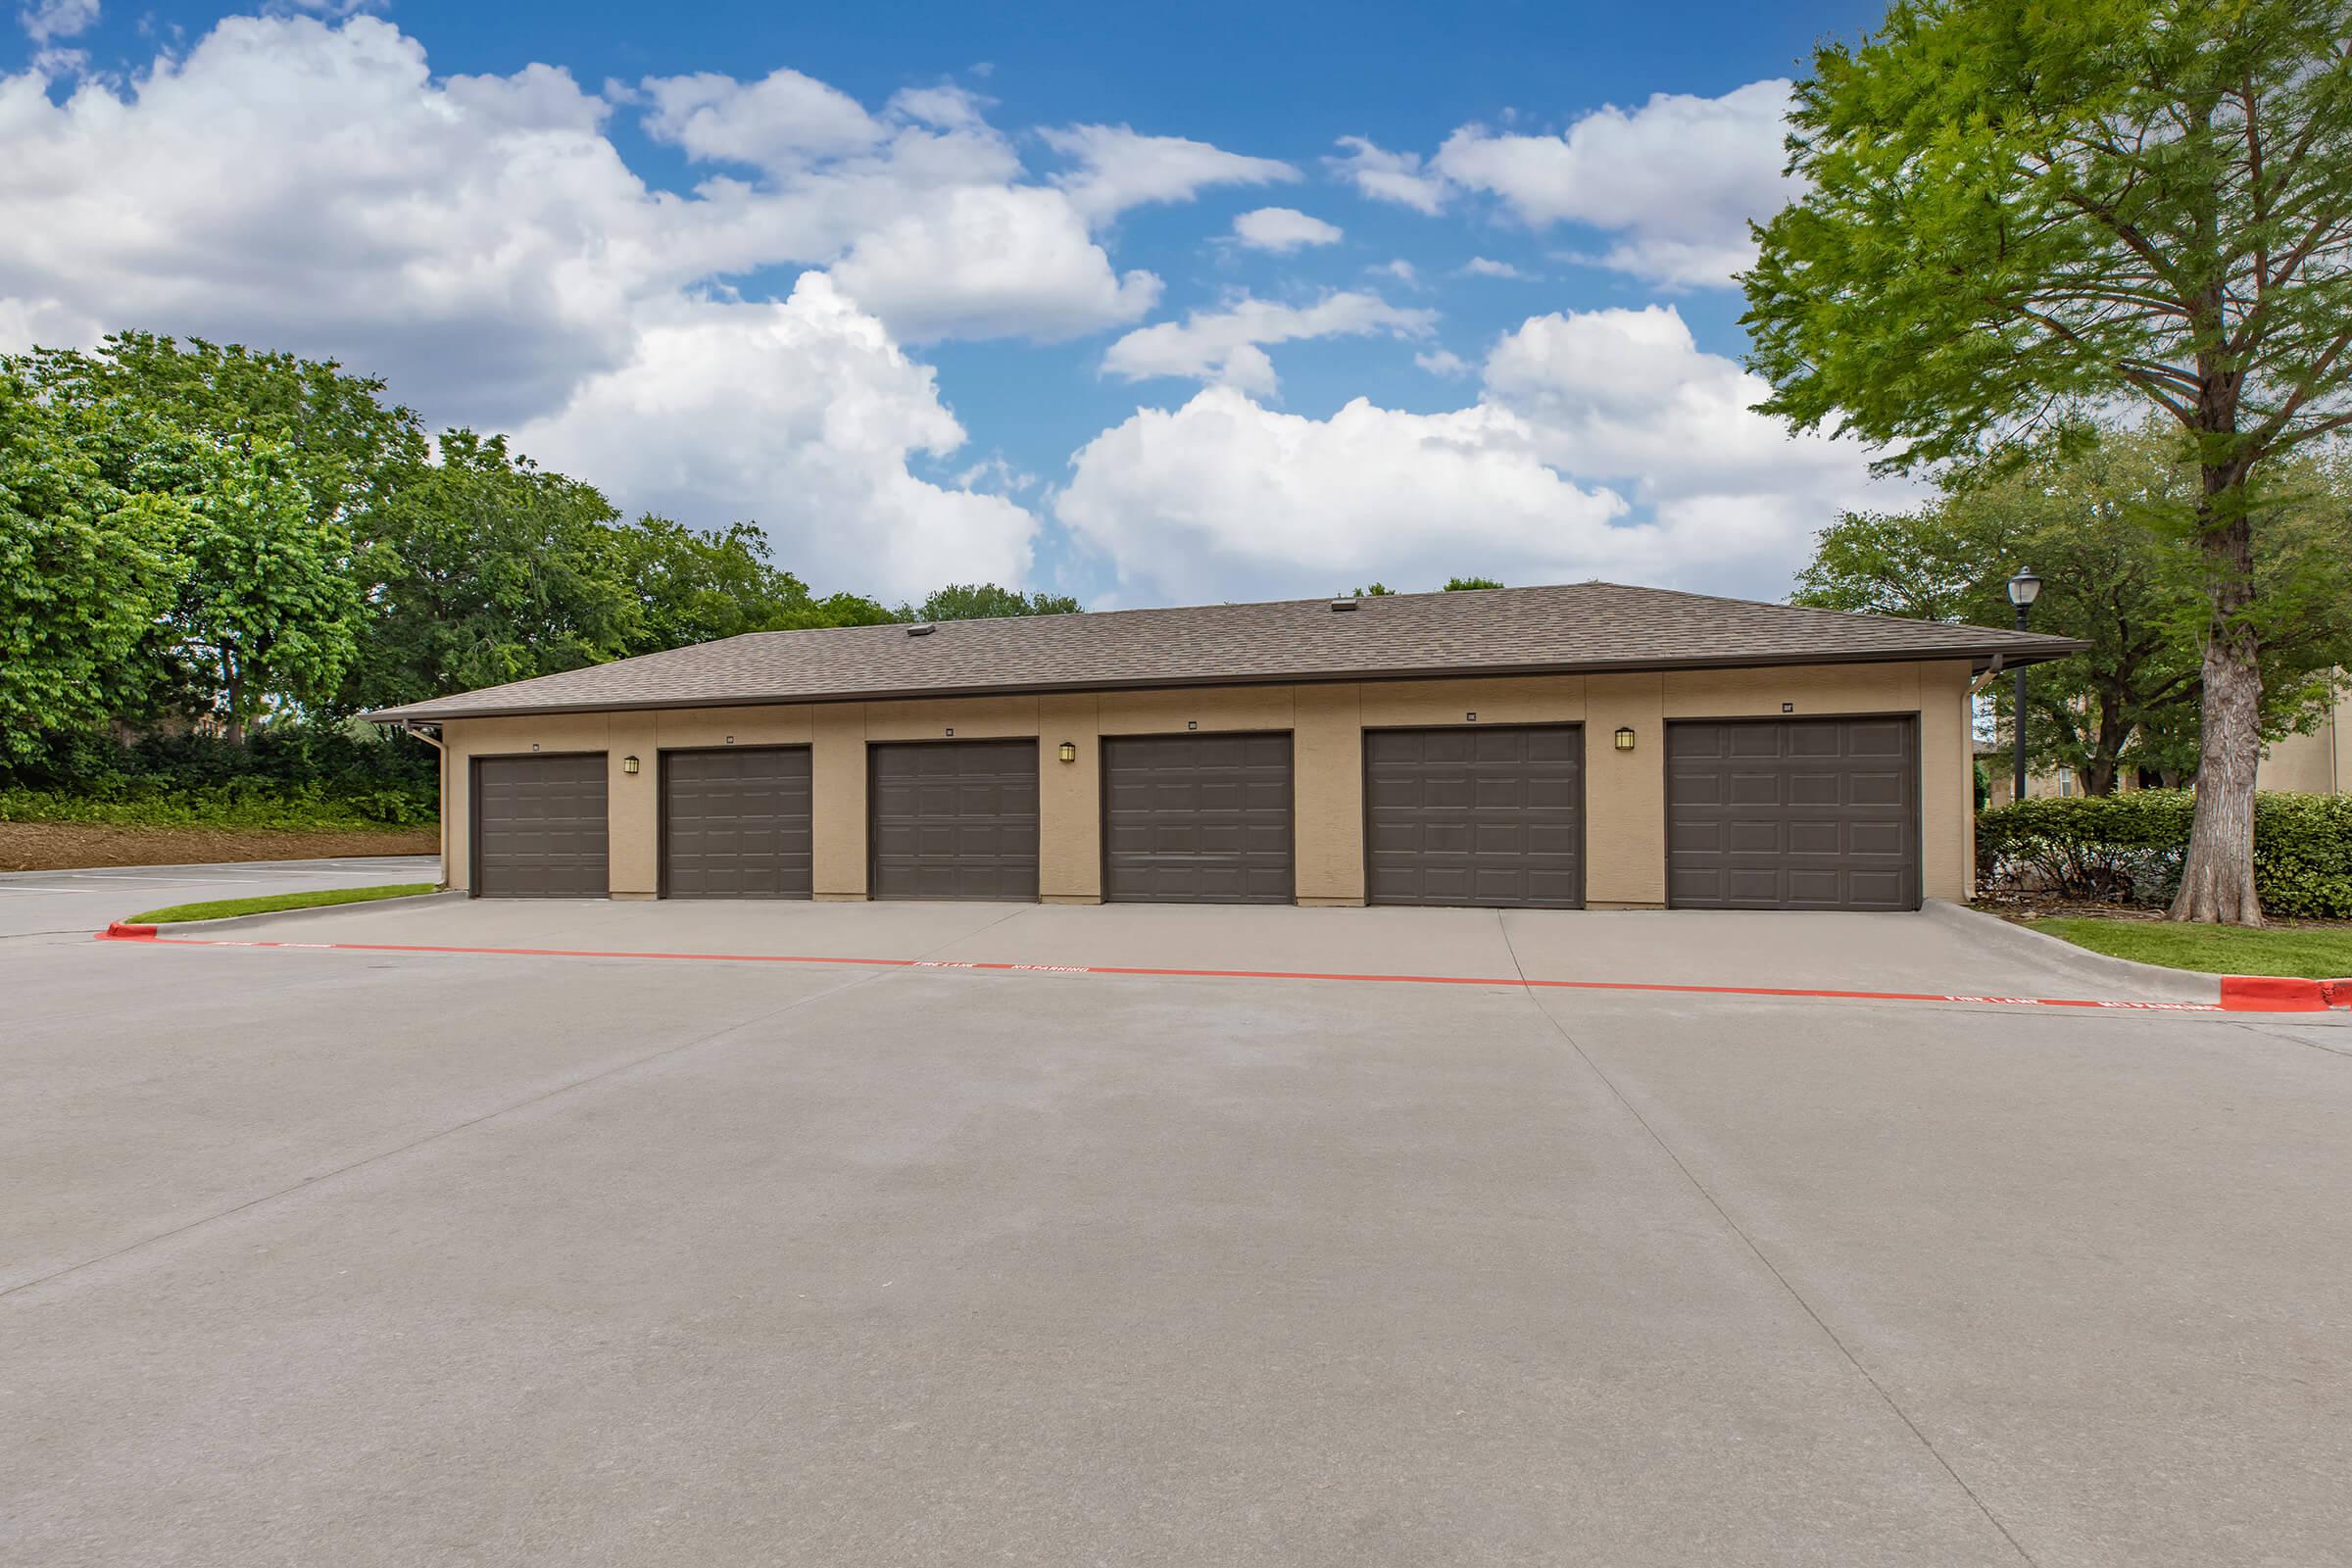 The Ranch at Ridgeview Apartments garages